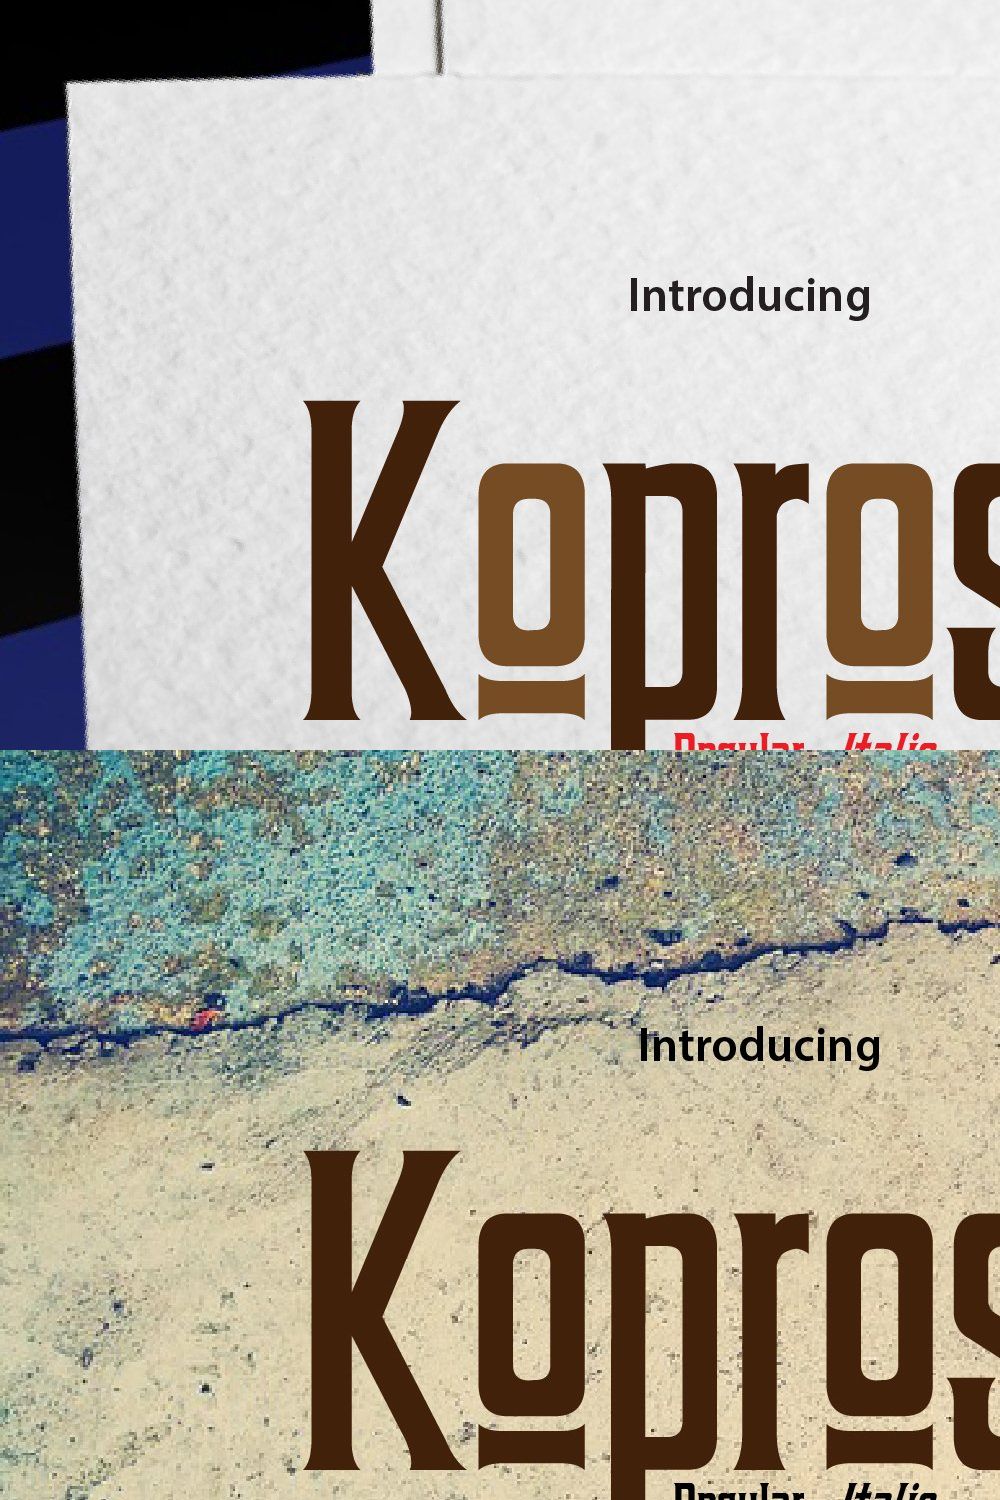 Koprost pinterest preview image.